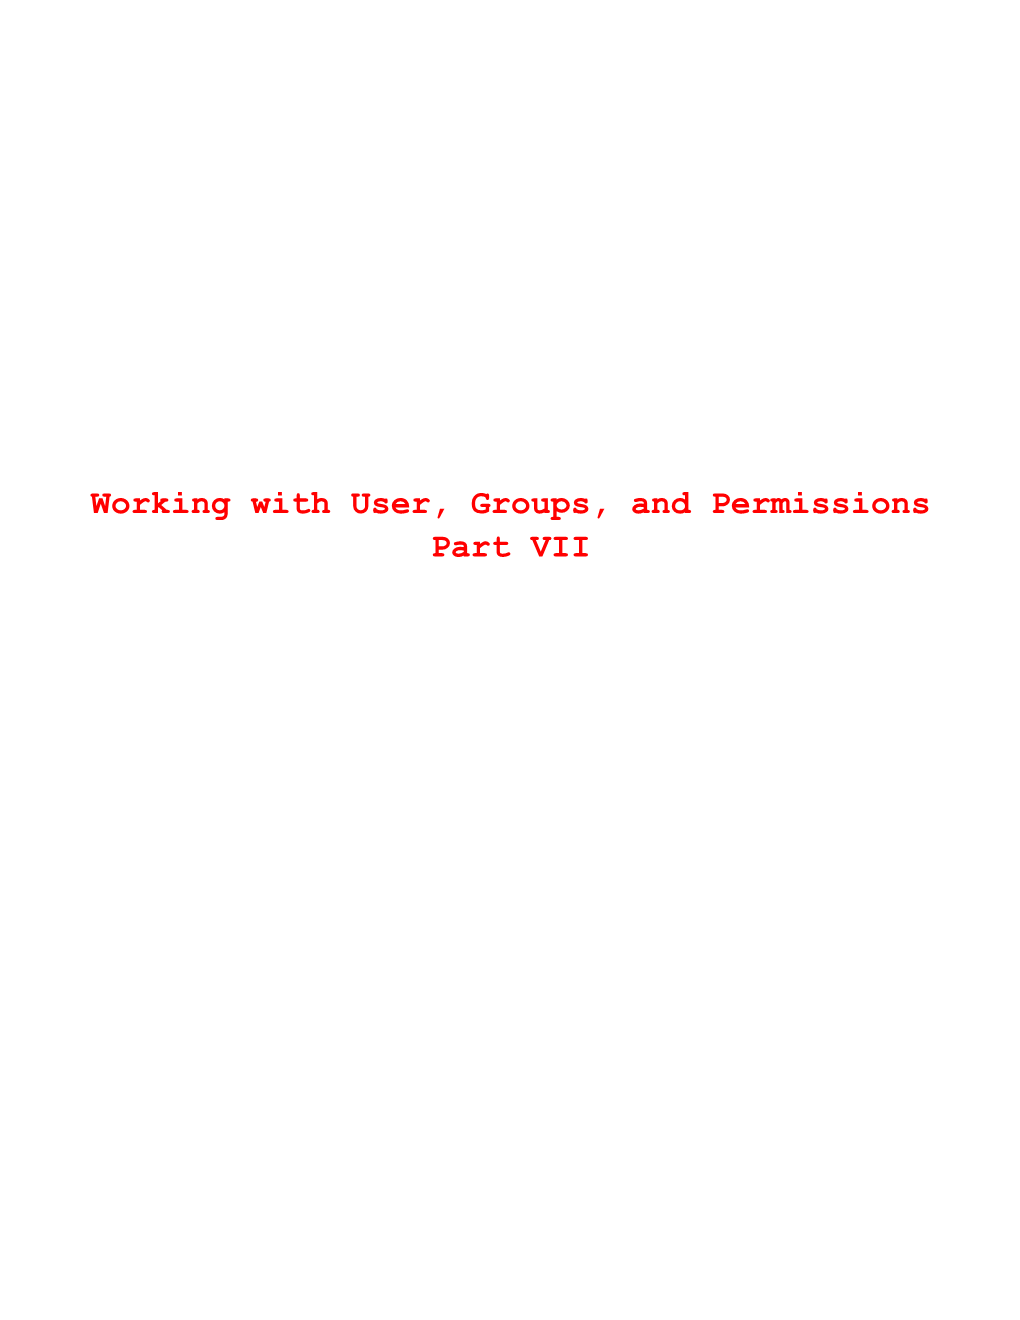 Working with User, Groups, and Permissions